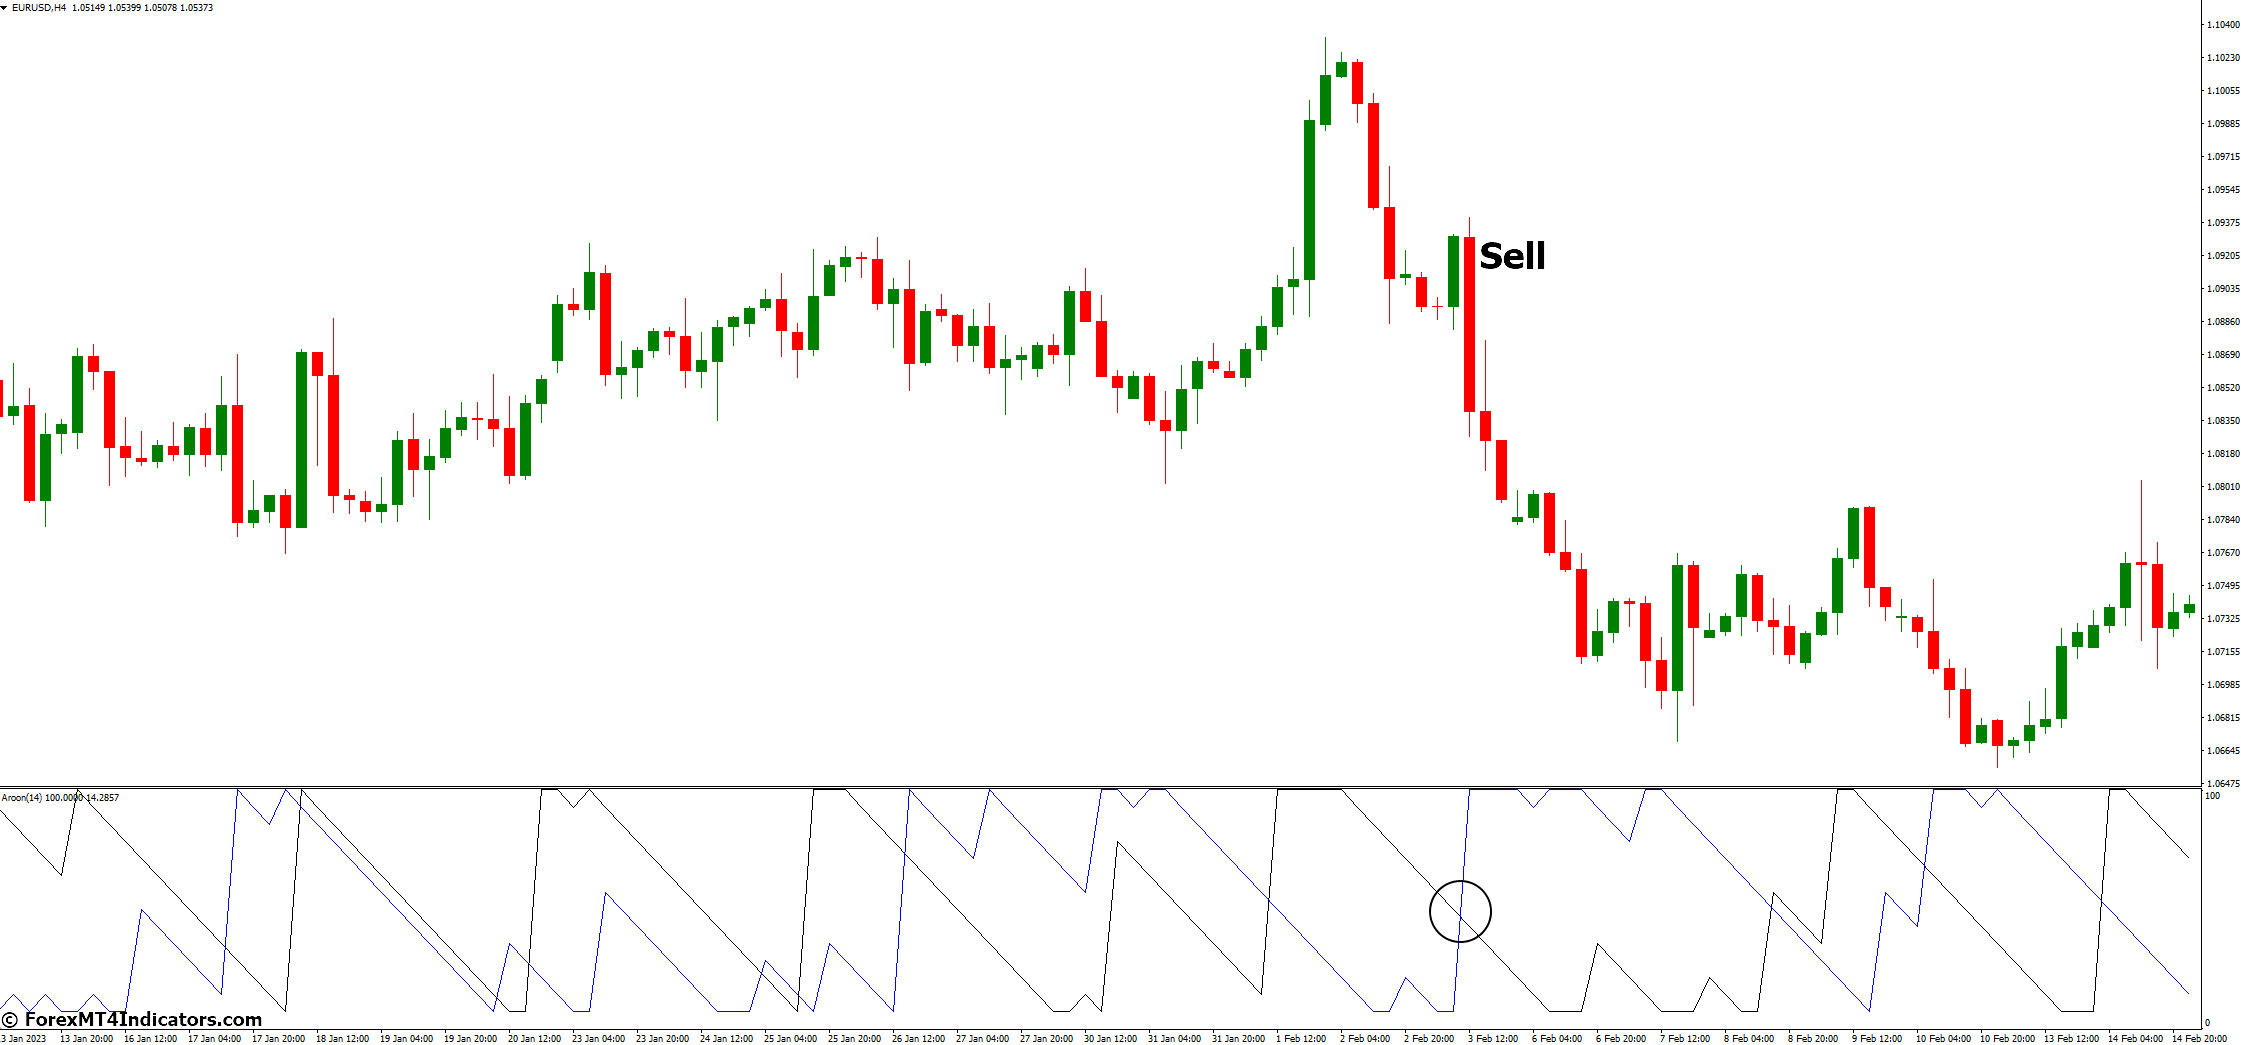 How to Trade with Aroon MT4 Indicator - Sell Entry